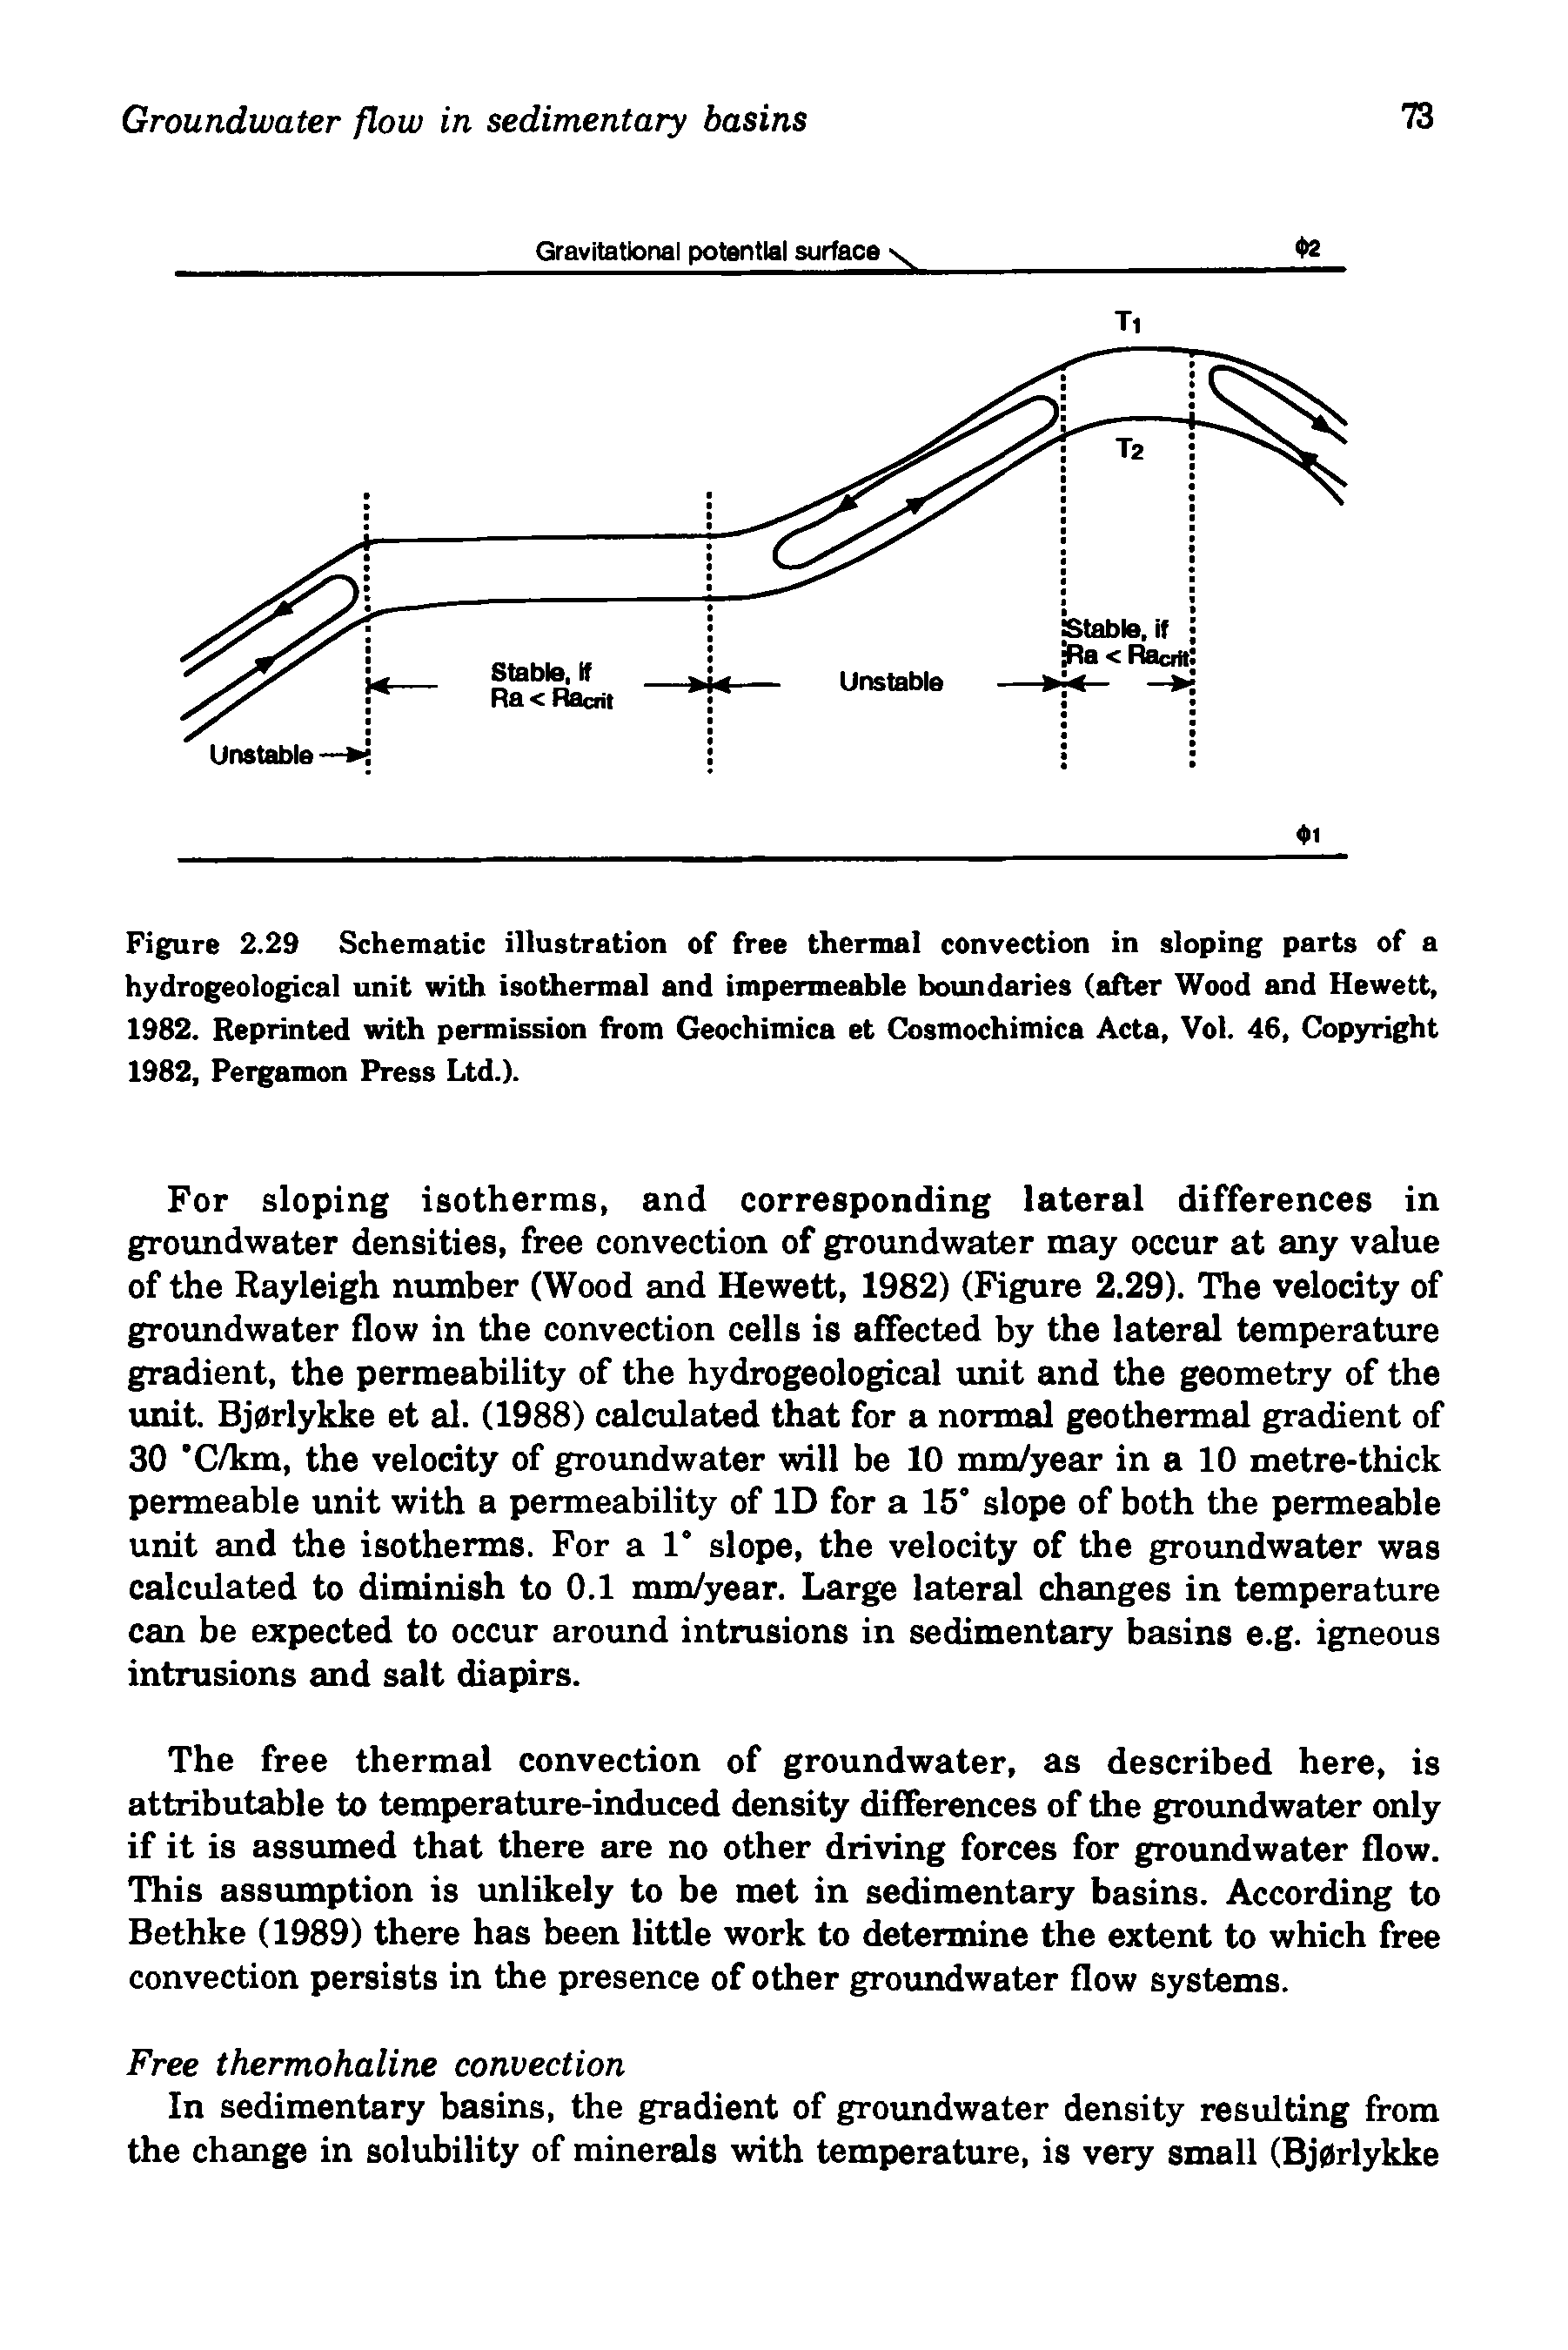 Figure 2.29 Schematic illustration of free thermal convection in sloping parts of a hydrogeological unit with isothermal and impermeable boundaries (after Wood and Hewett, 1982. Reprinted with permission from Geochimica et Cosmochimica Acta, Vol. 46, Copyright 1982, Pergamon Press Ltd.).